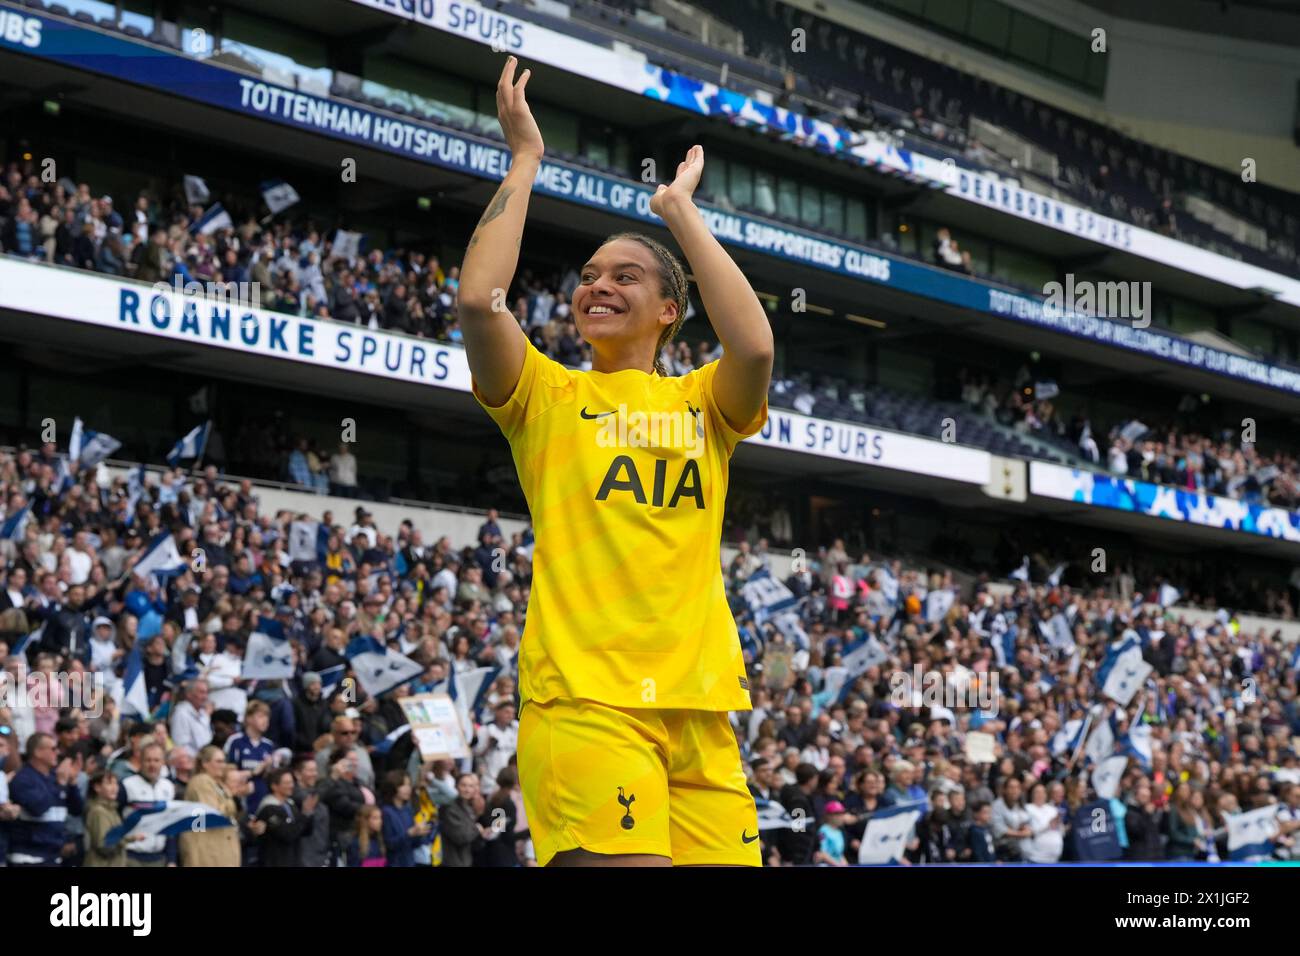 Tottenham, London, UK. 14th Apr, 2024. Becky Spencer claps with fans after win at the Women's FA Cup Semi Final at Tottenham Hotspur Stadium, London, England. (Rachel Lee/SPP) Credit: SPP Sport Press Photo. /Alamy Live News Stock Photo